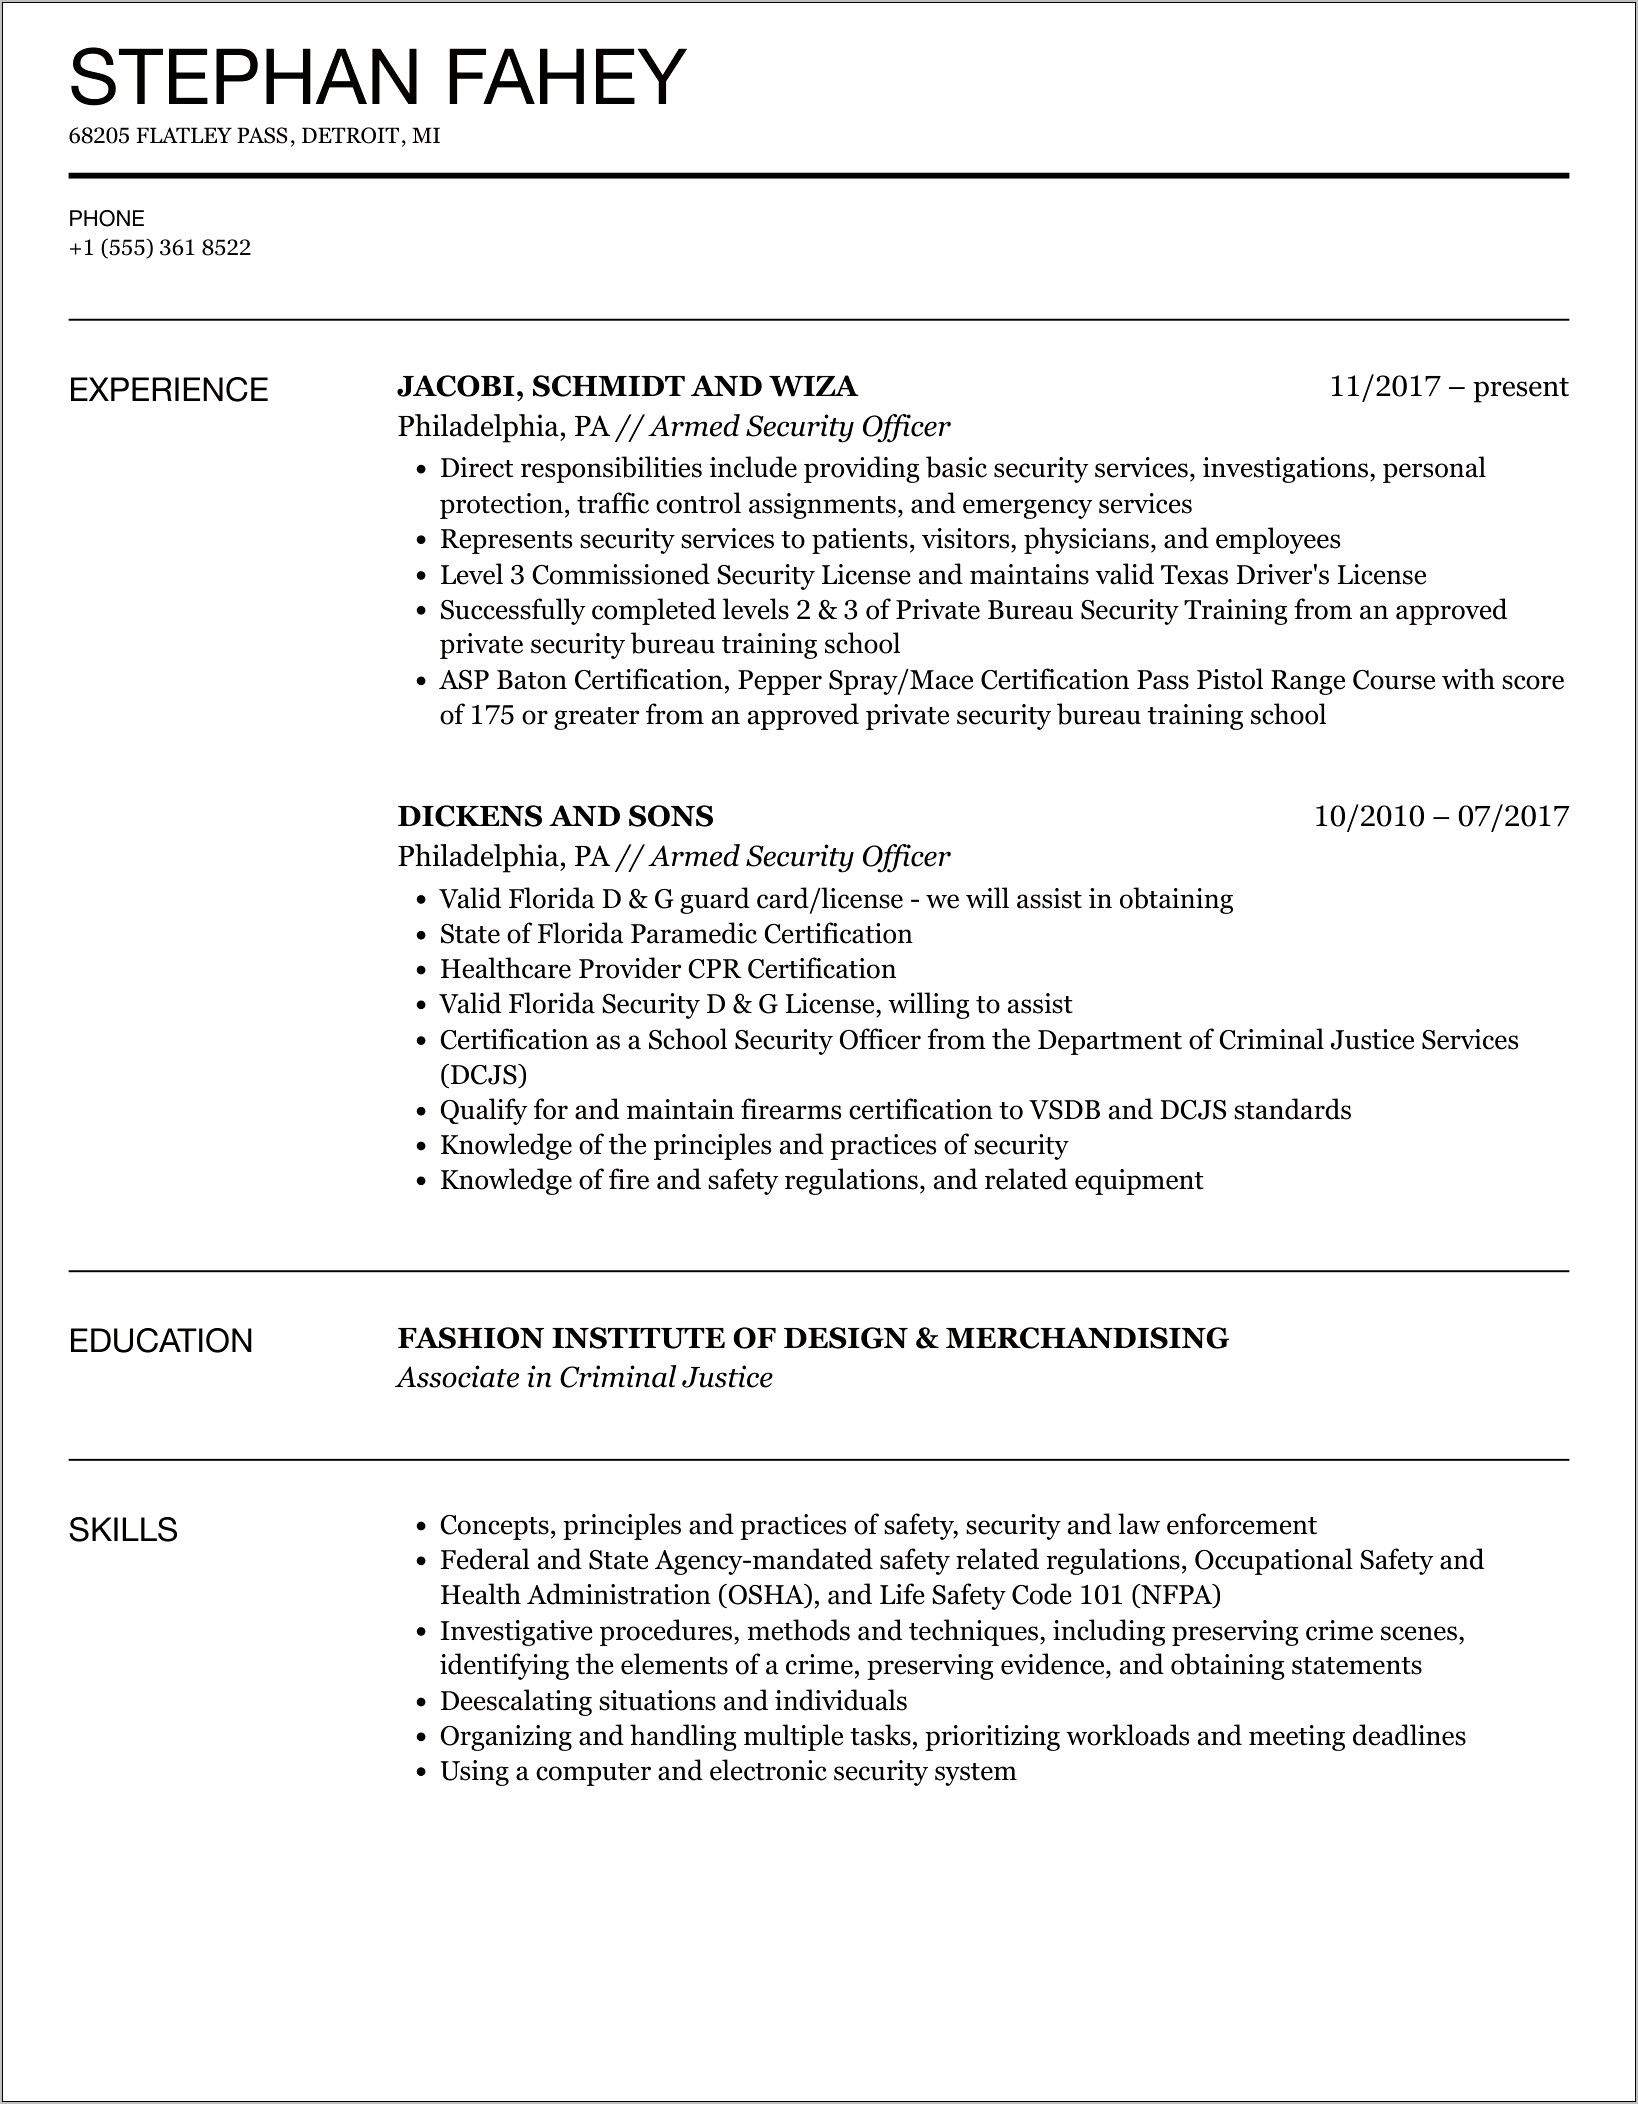 Security Officer Job Resume Objective